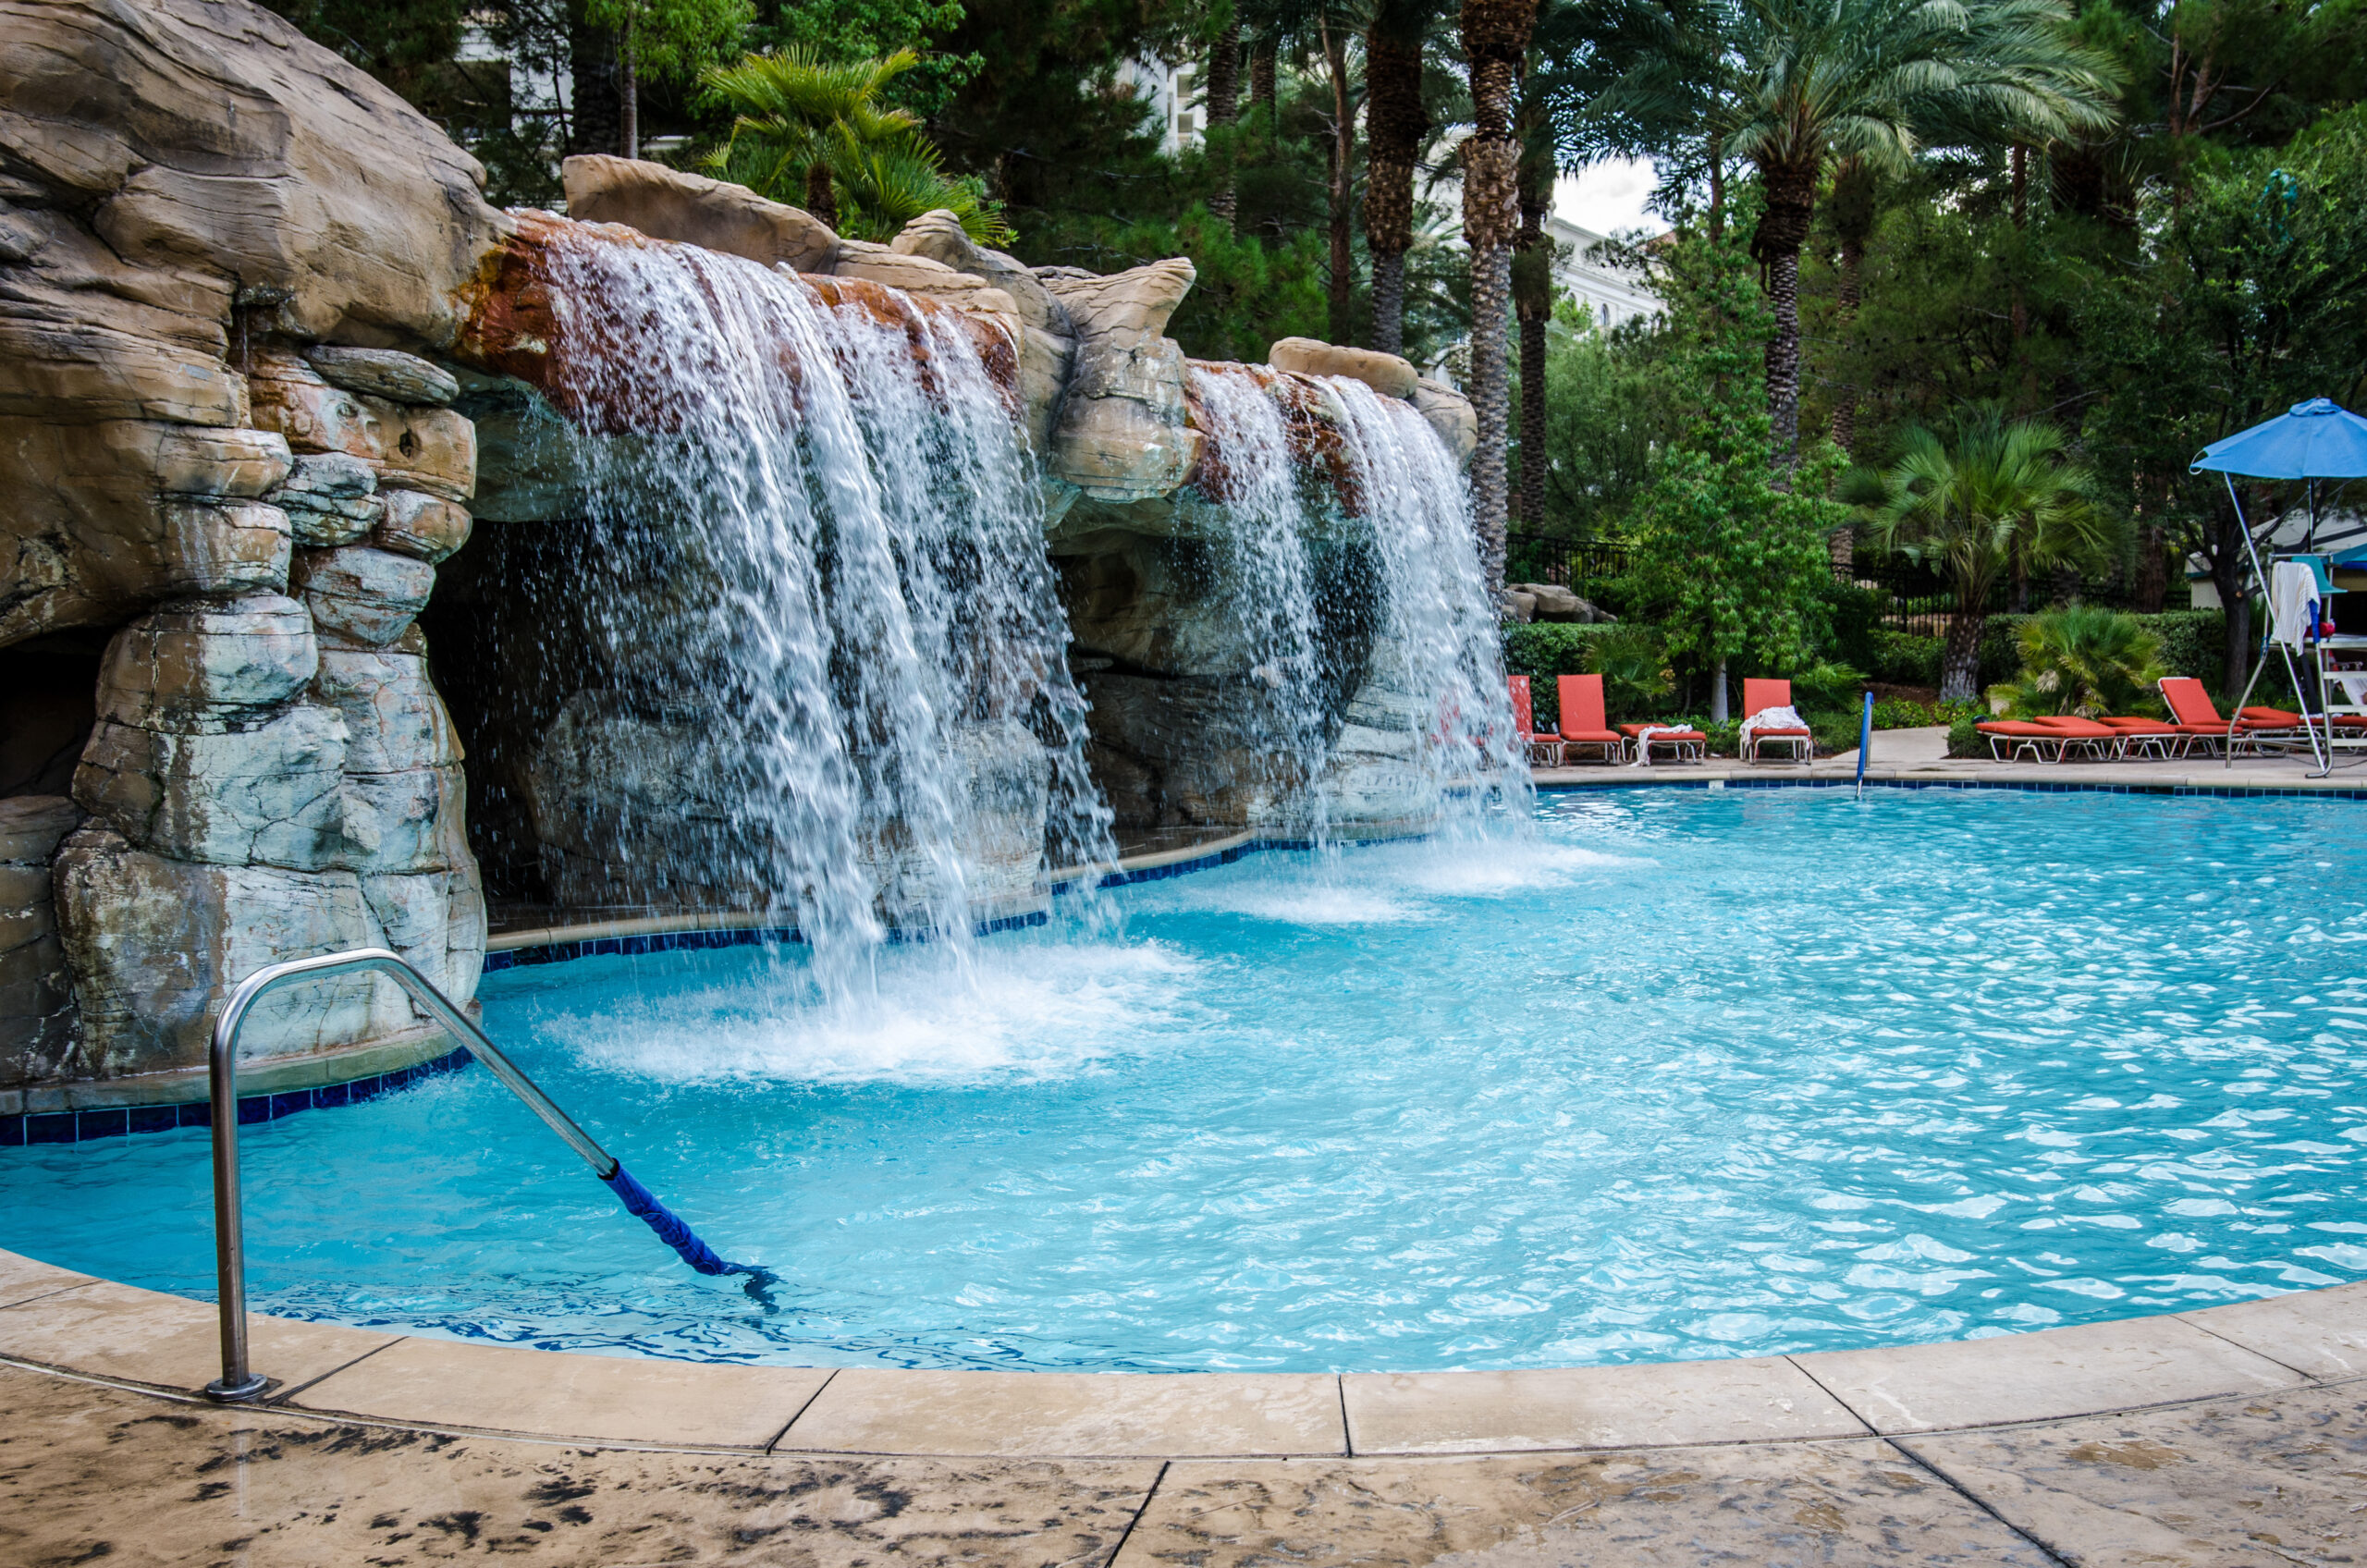 A pool with cascading waterfalls, providing both a visually stunning feature and a soothing auditory backdrop, enhancing the overall ambiance of the swimming area.